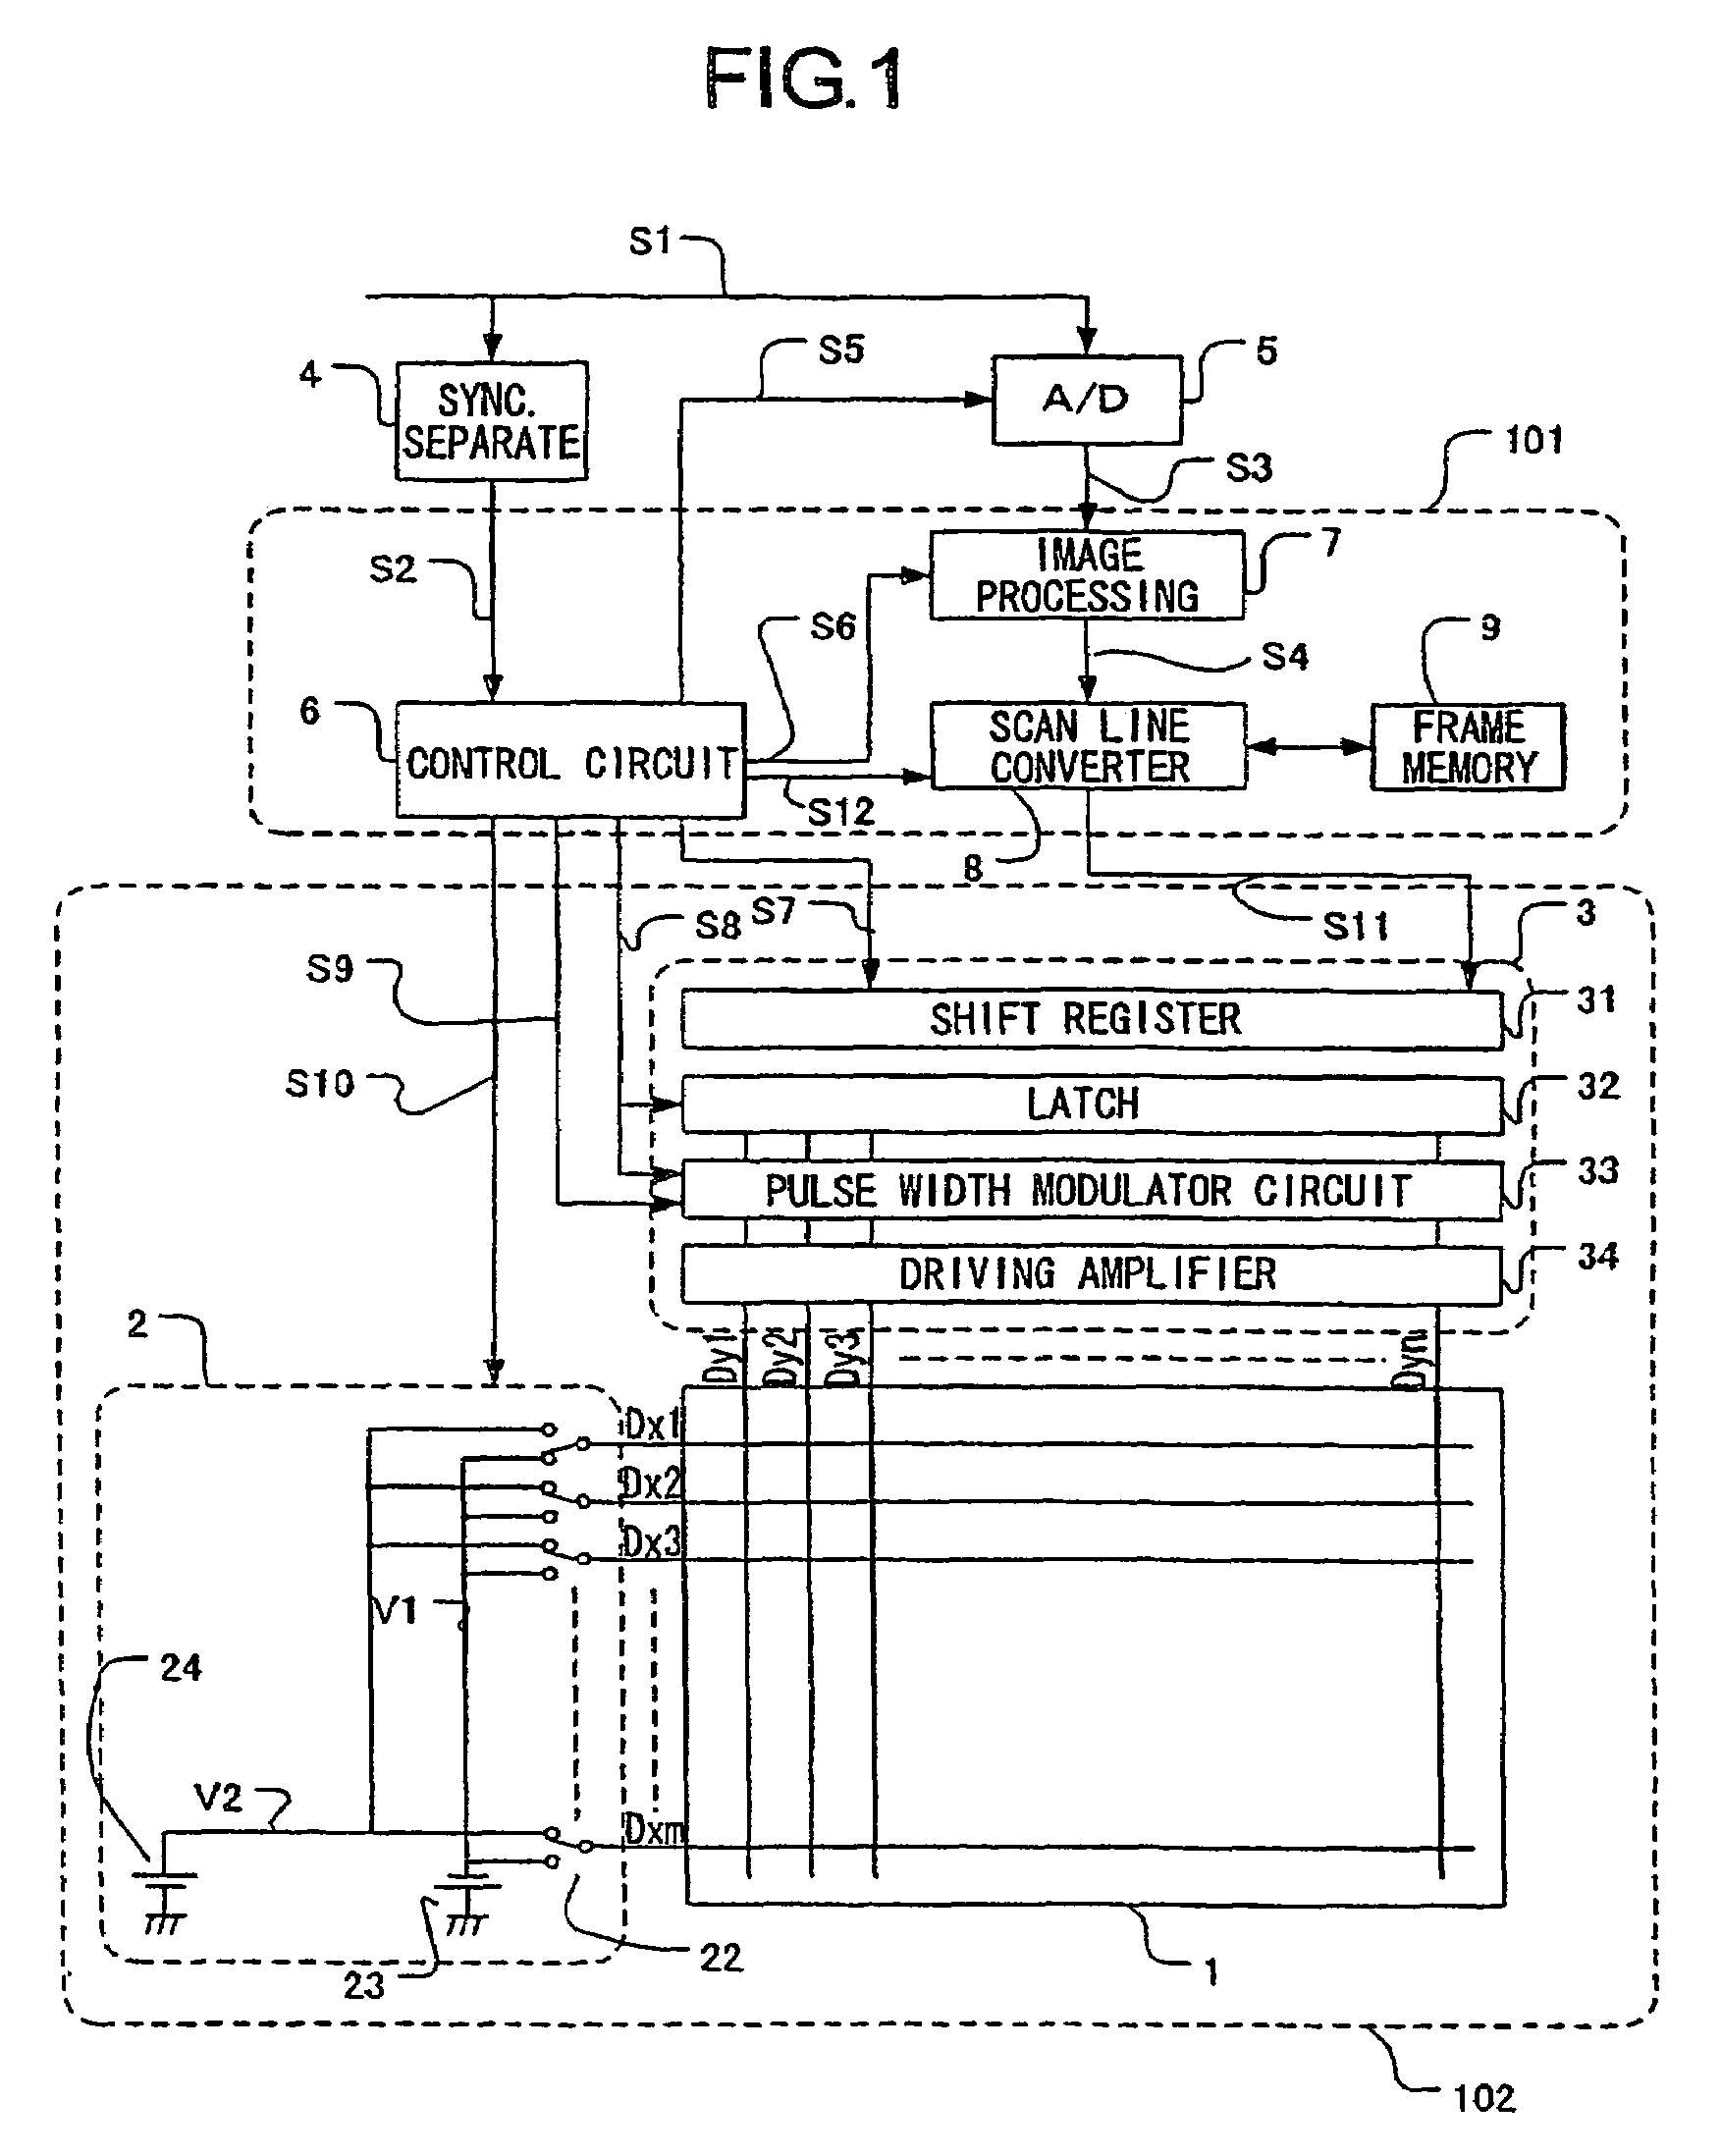 Image forming apparatus and video receiving and display apparatus